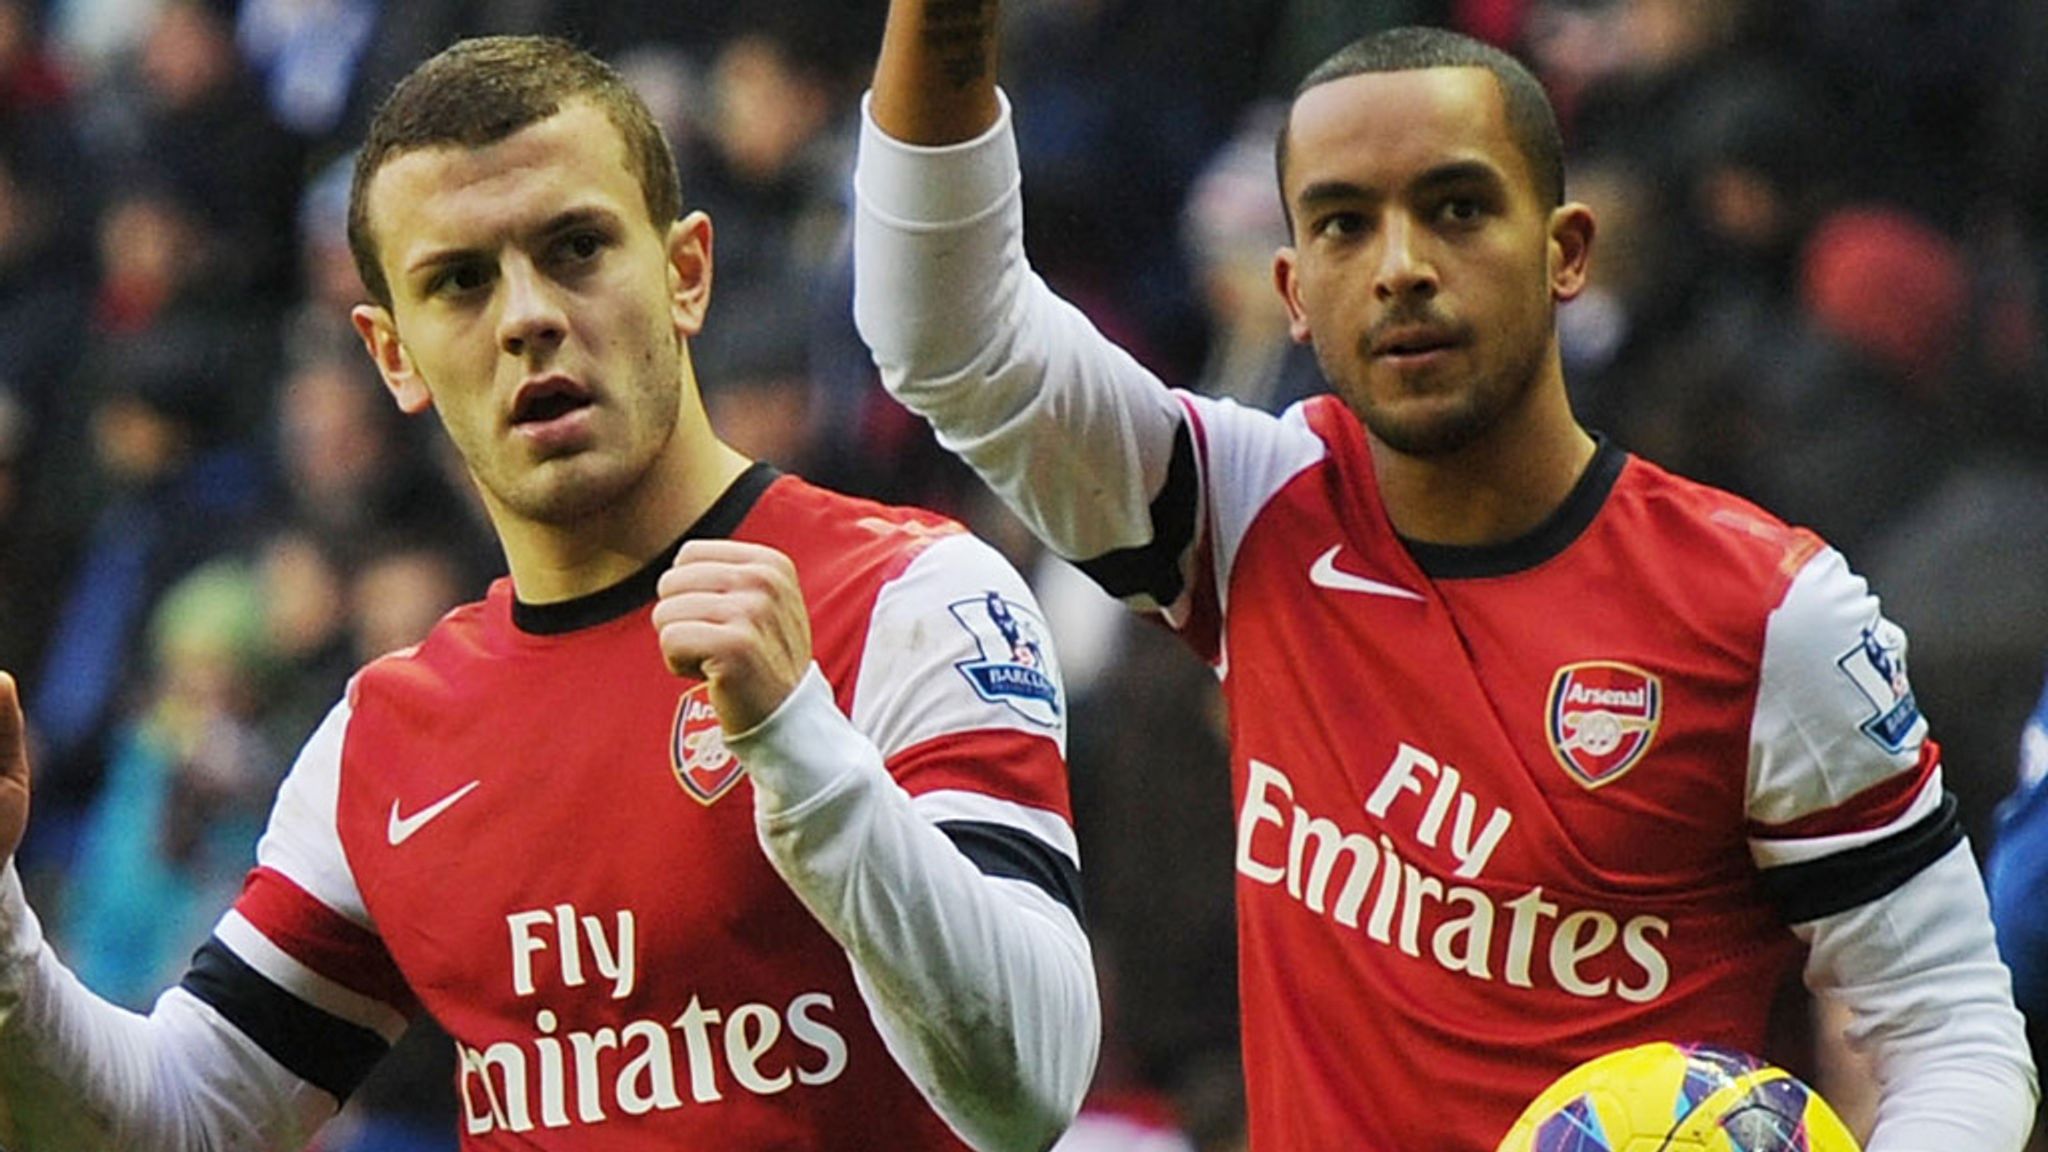 Wilshere, Walcott Failed To Utilise Their Potentials –Gallas